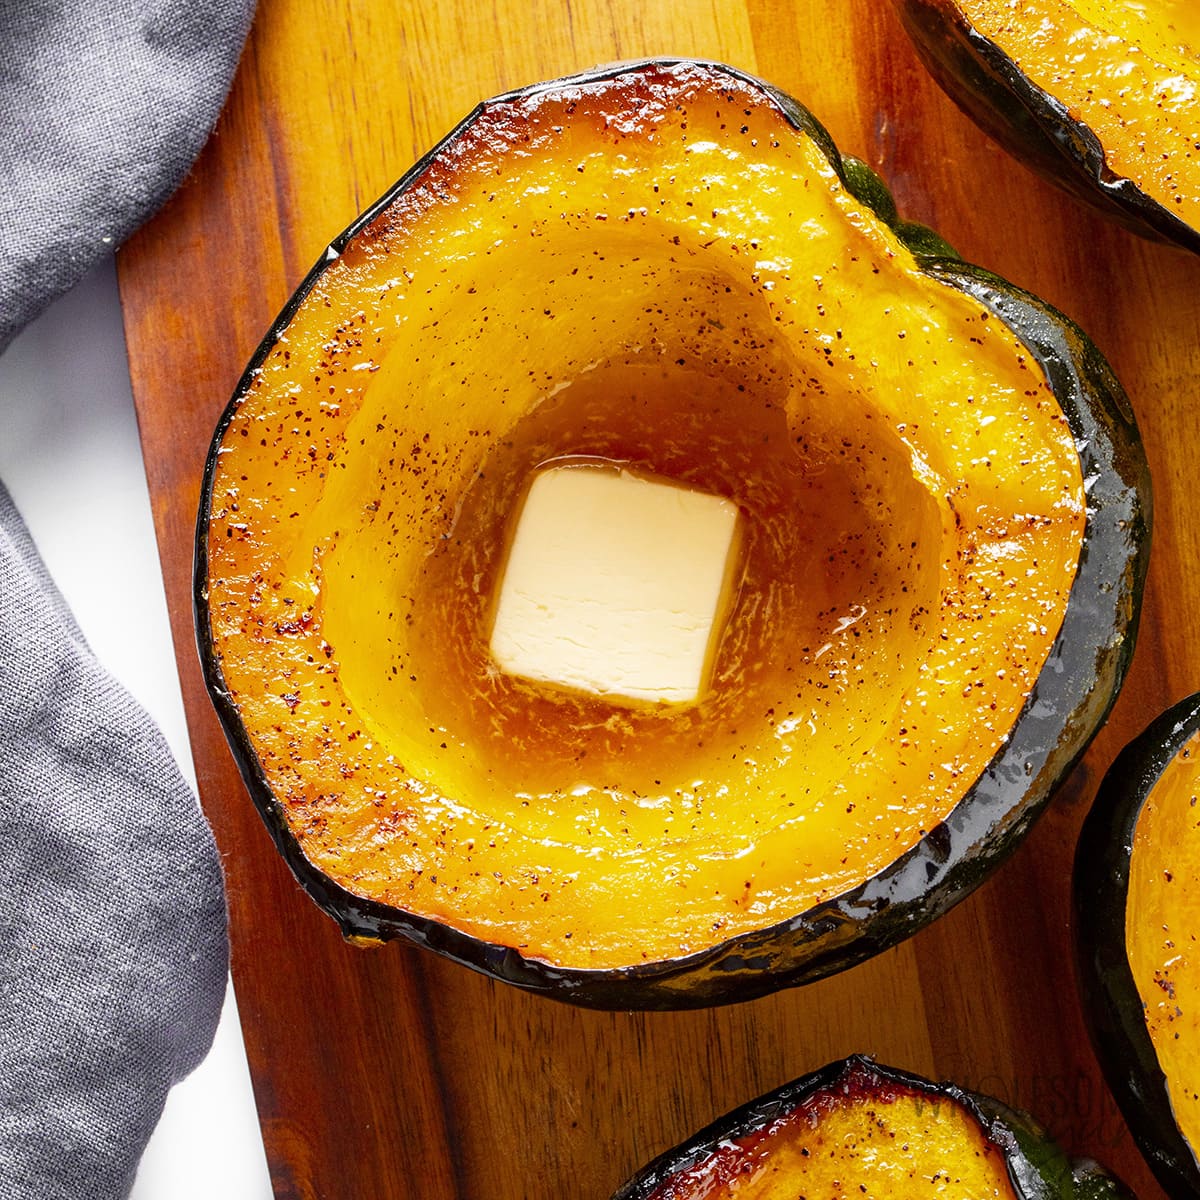 Roasted acorn squash topped with butter on a cutting board.